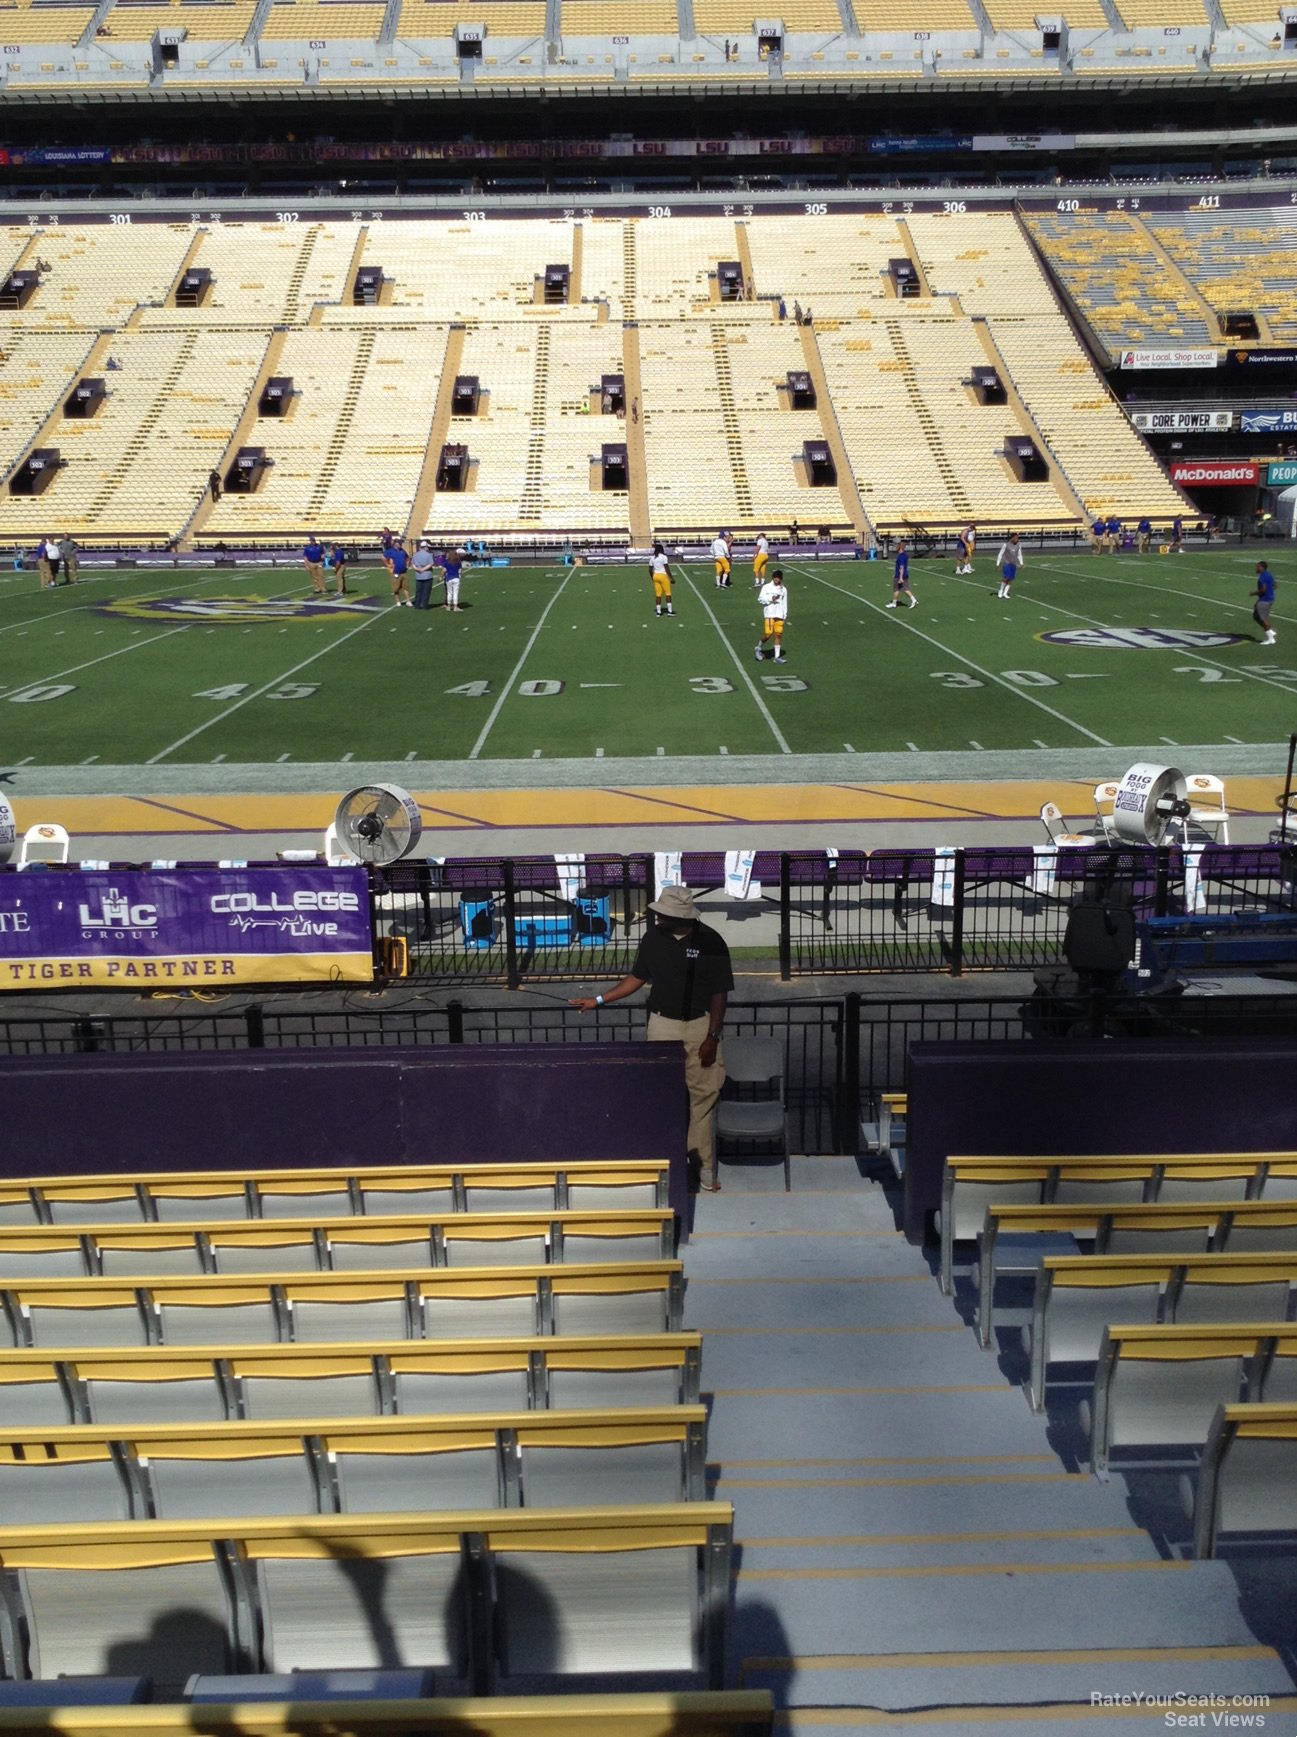 Lsu Seating Chart With Rows